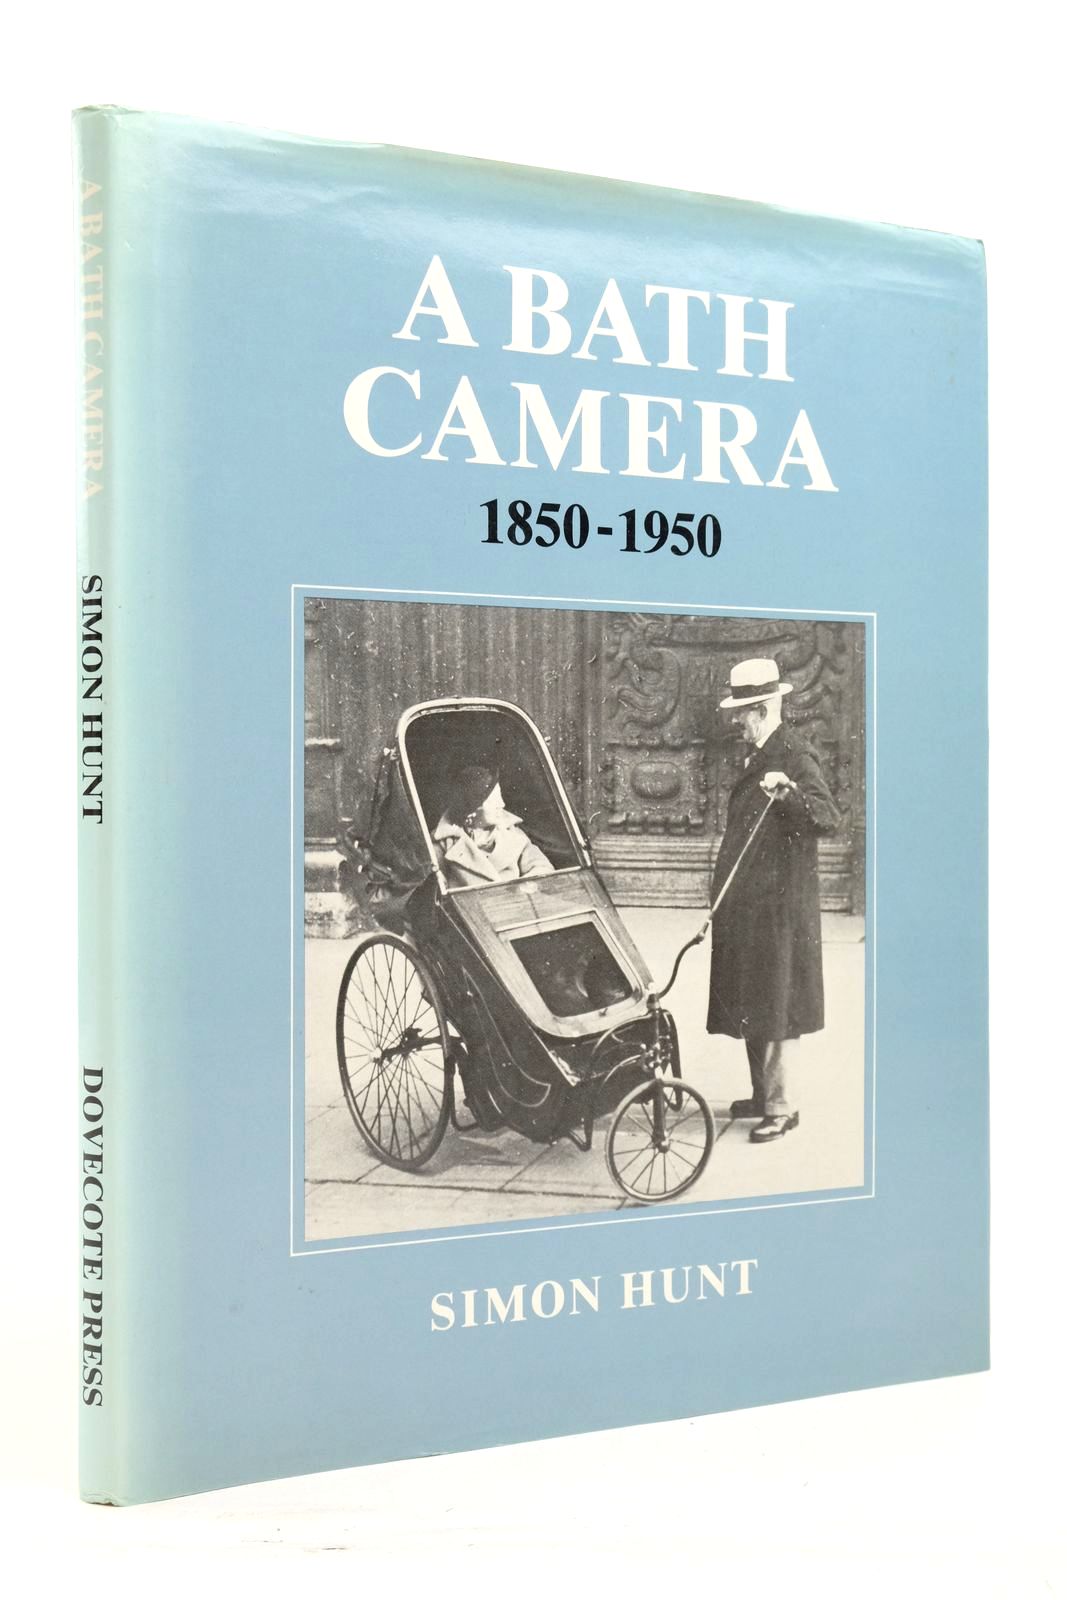 Photo of A BATH CAMERA 1850-1950 written by Hunt, Simon published by Dovecote Press (STOCK CODE: 2137662)  for sale by Stella & Rose's Books